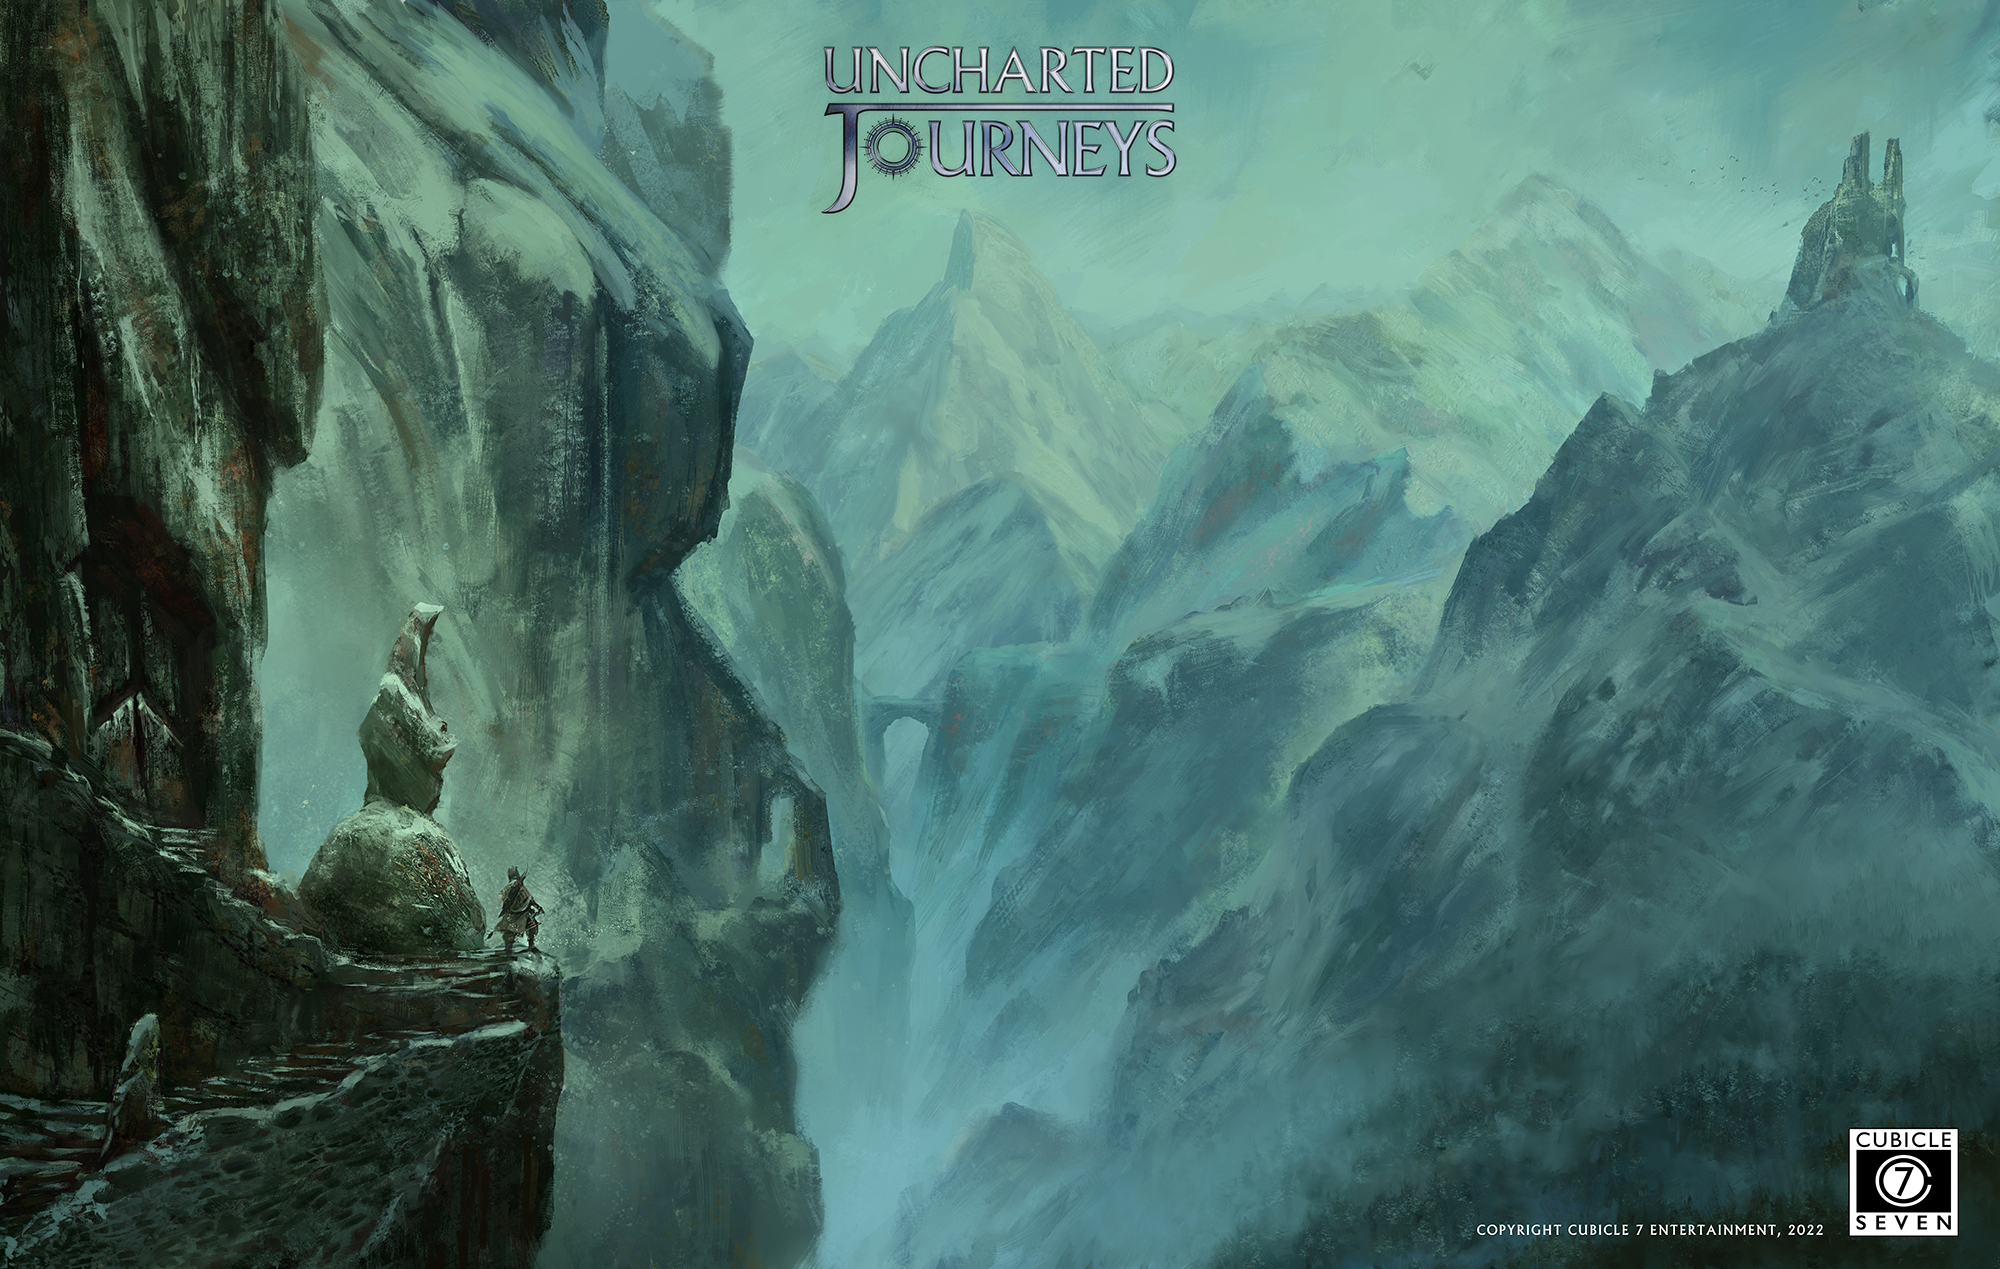 Uncharted Journeys Outrider Art - Cubicle 7